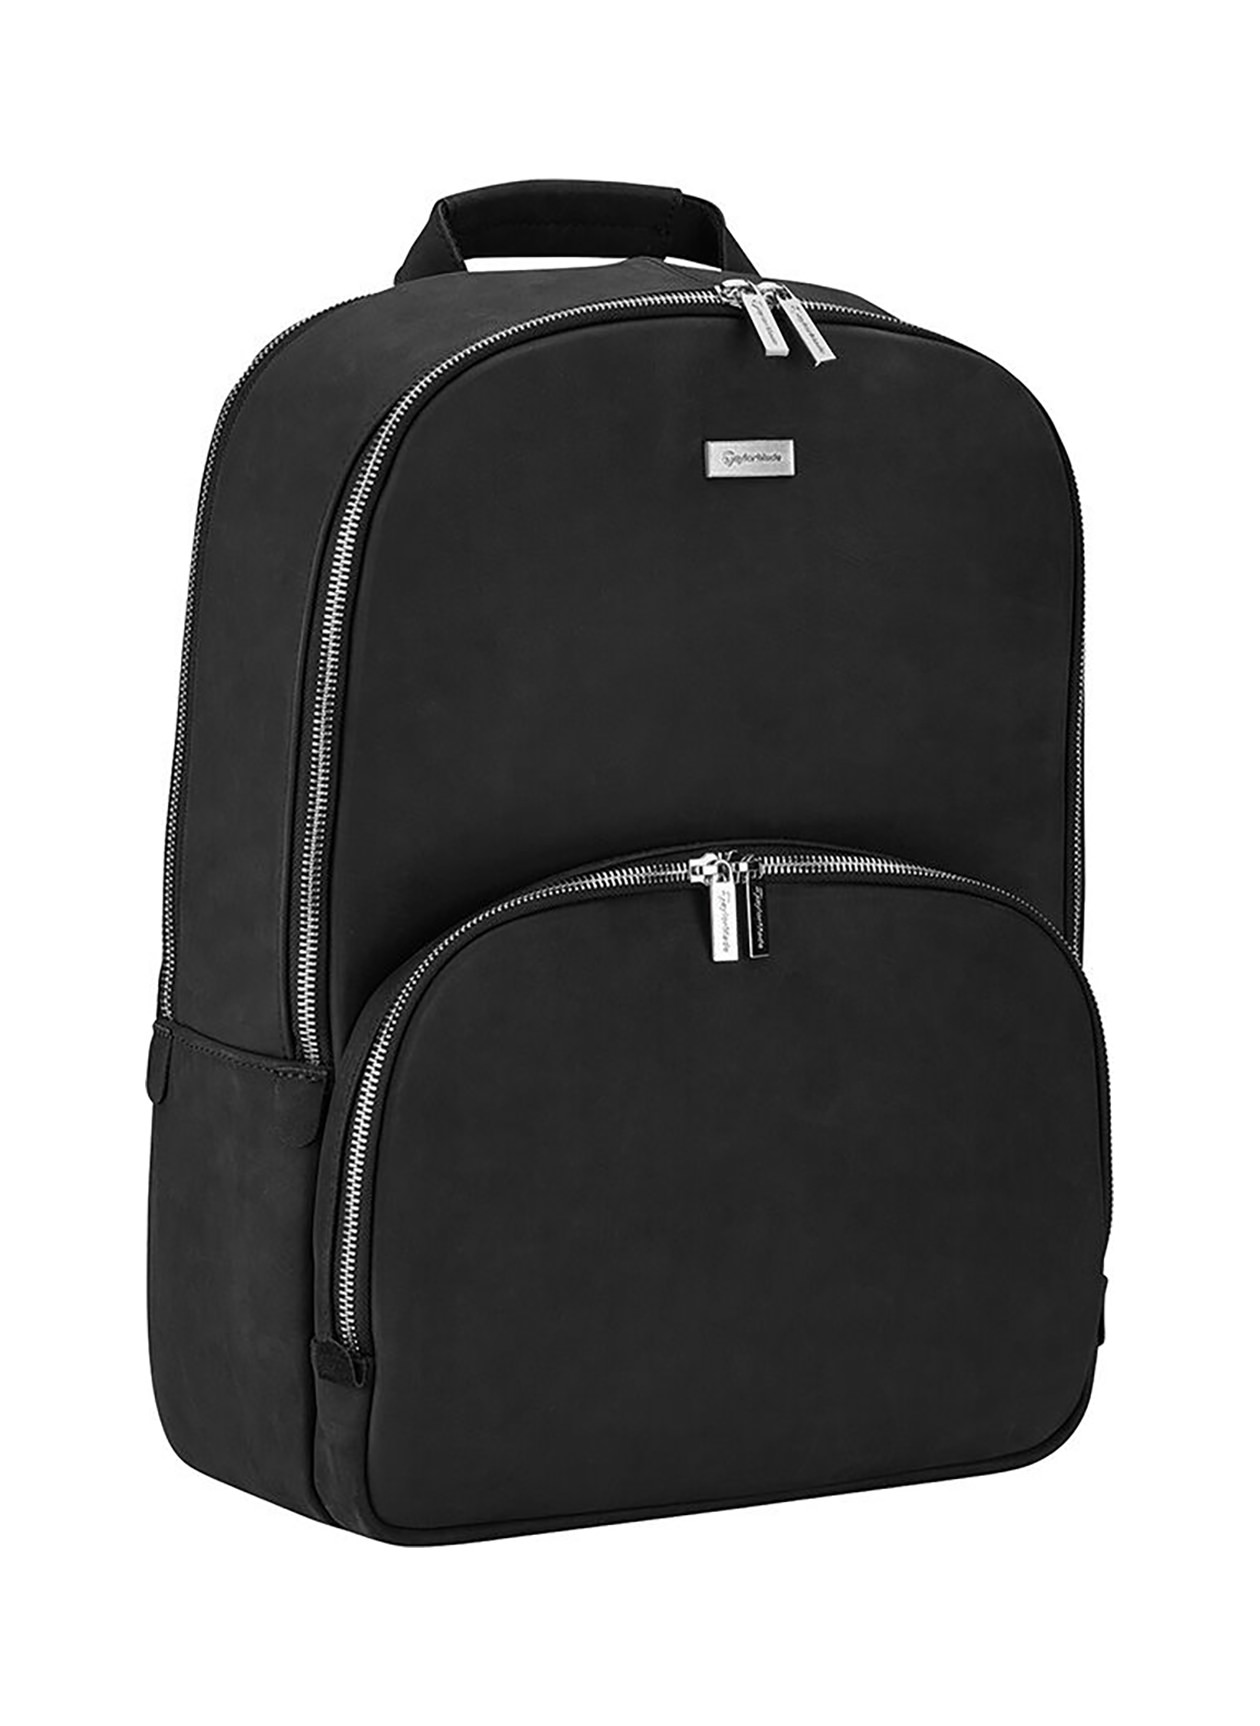 TaylorMade Black Signature Backpack